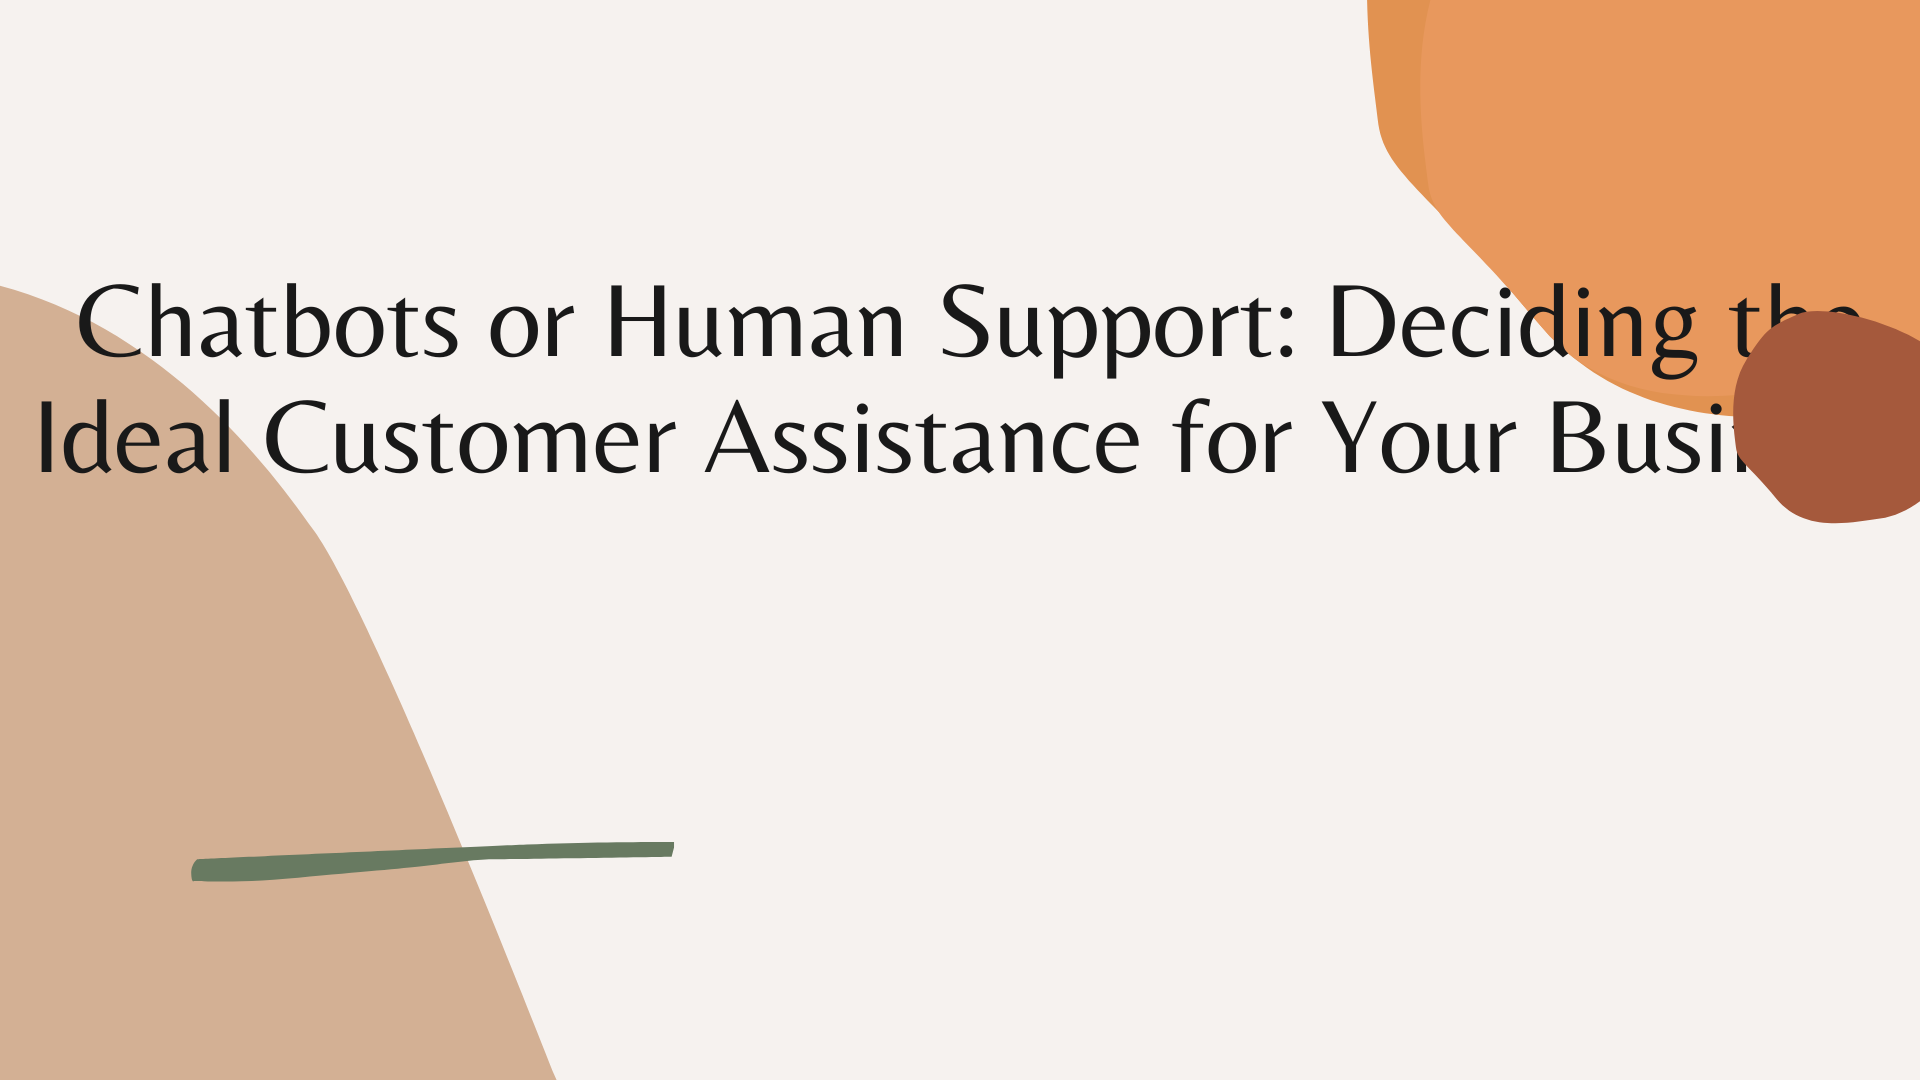 Chatbots or Human Support: Deciding the Ideal Customer Assistance for Your Business